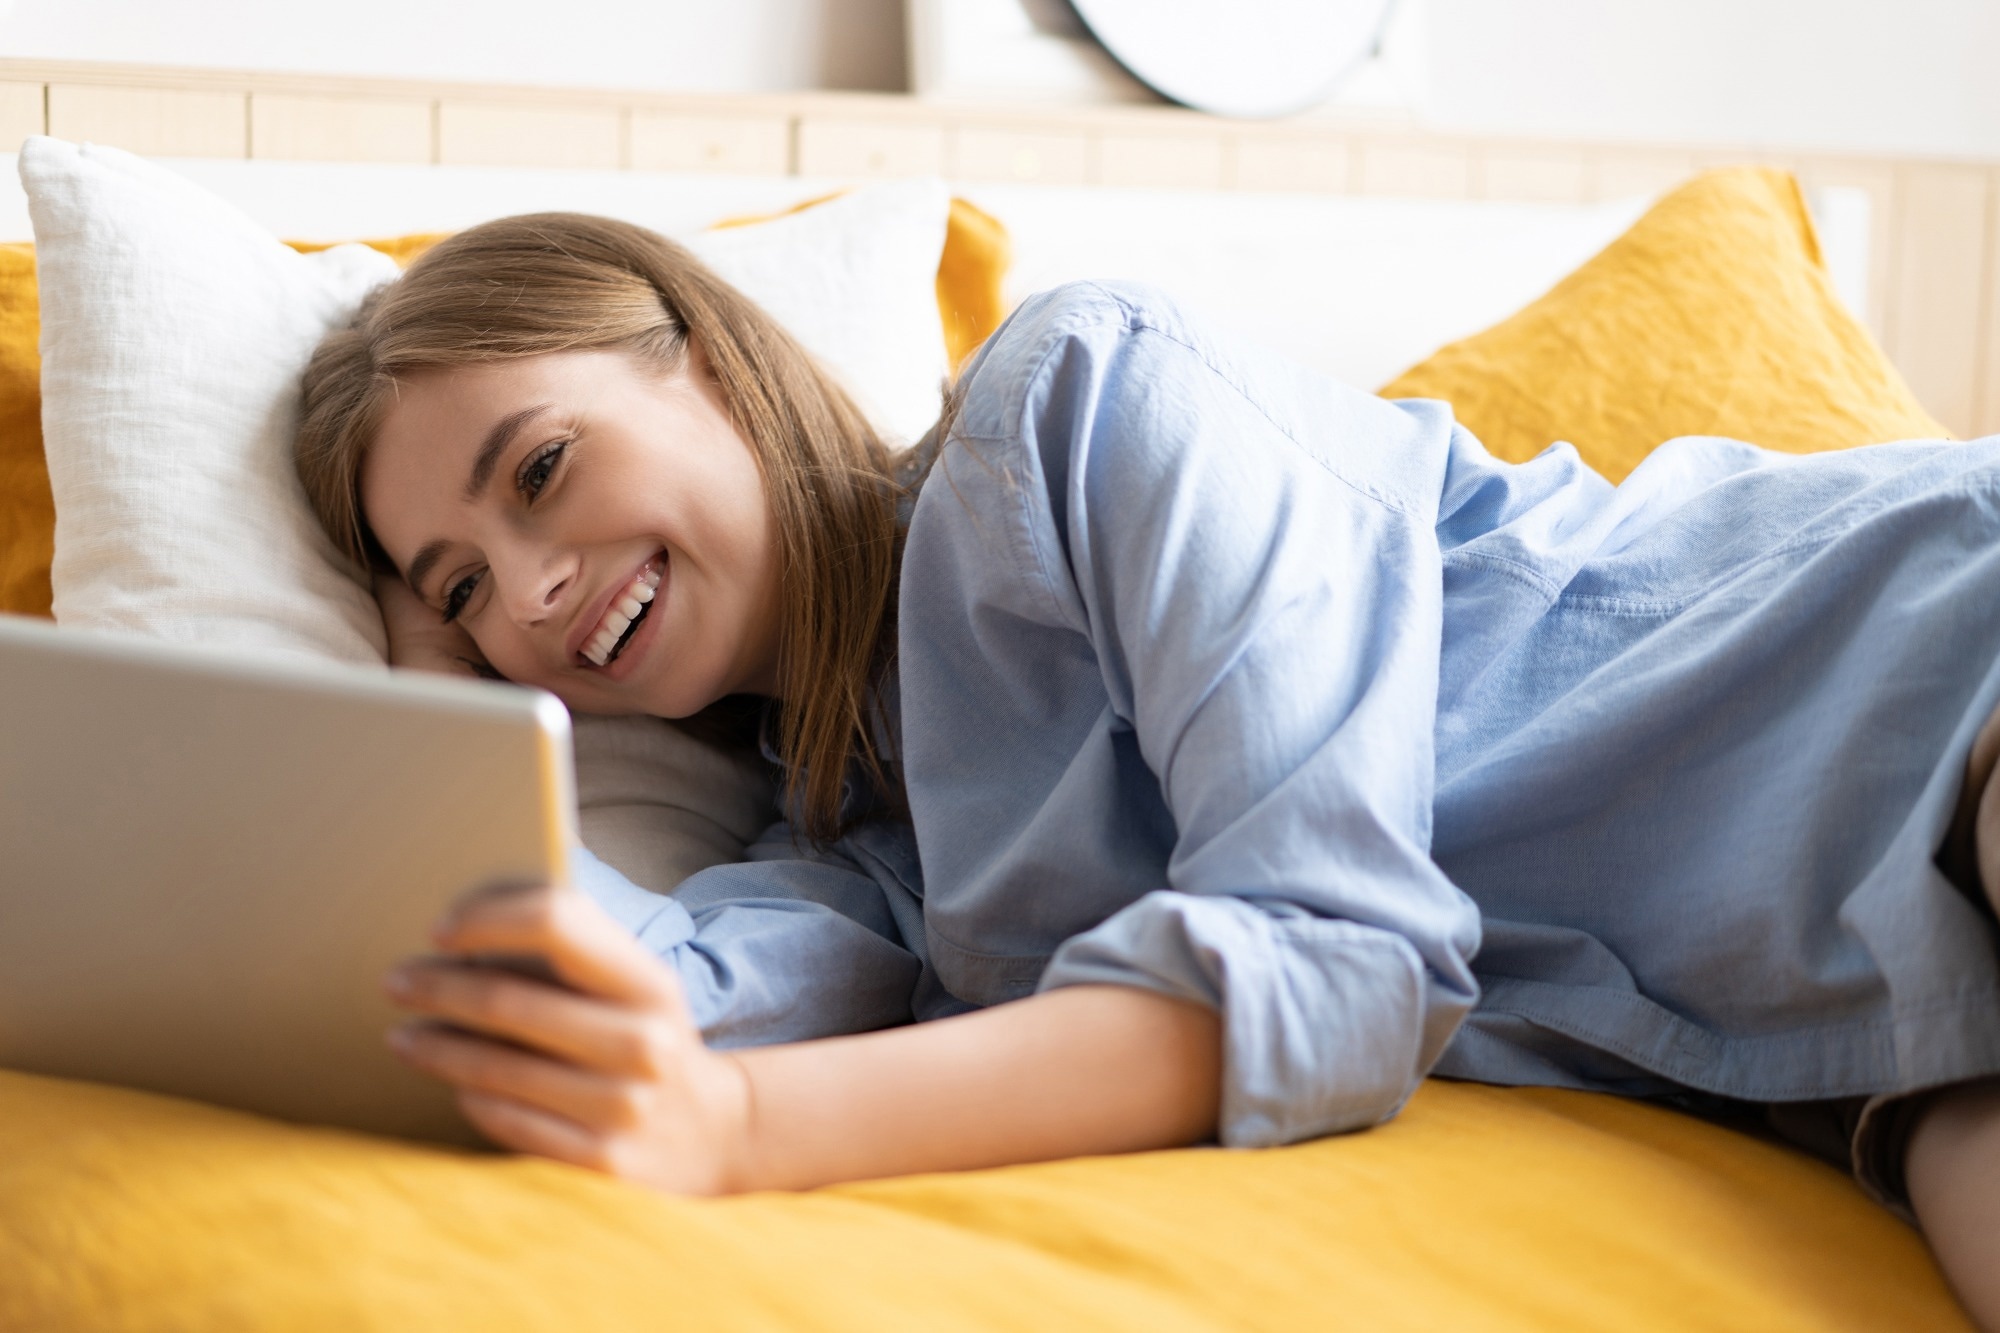 Study: The causal effects of leisure screen time on irritable bowel syndrome risk from a Mendelian randomization study. Image Credit: OPOLJA/Shutterstock.com